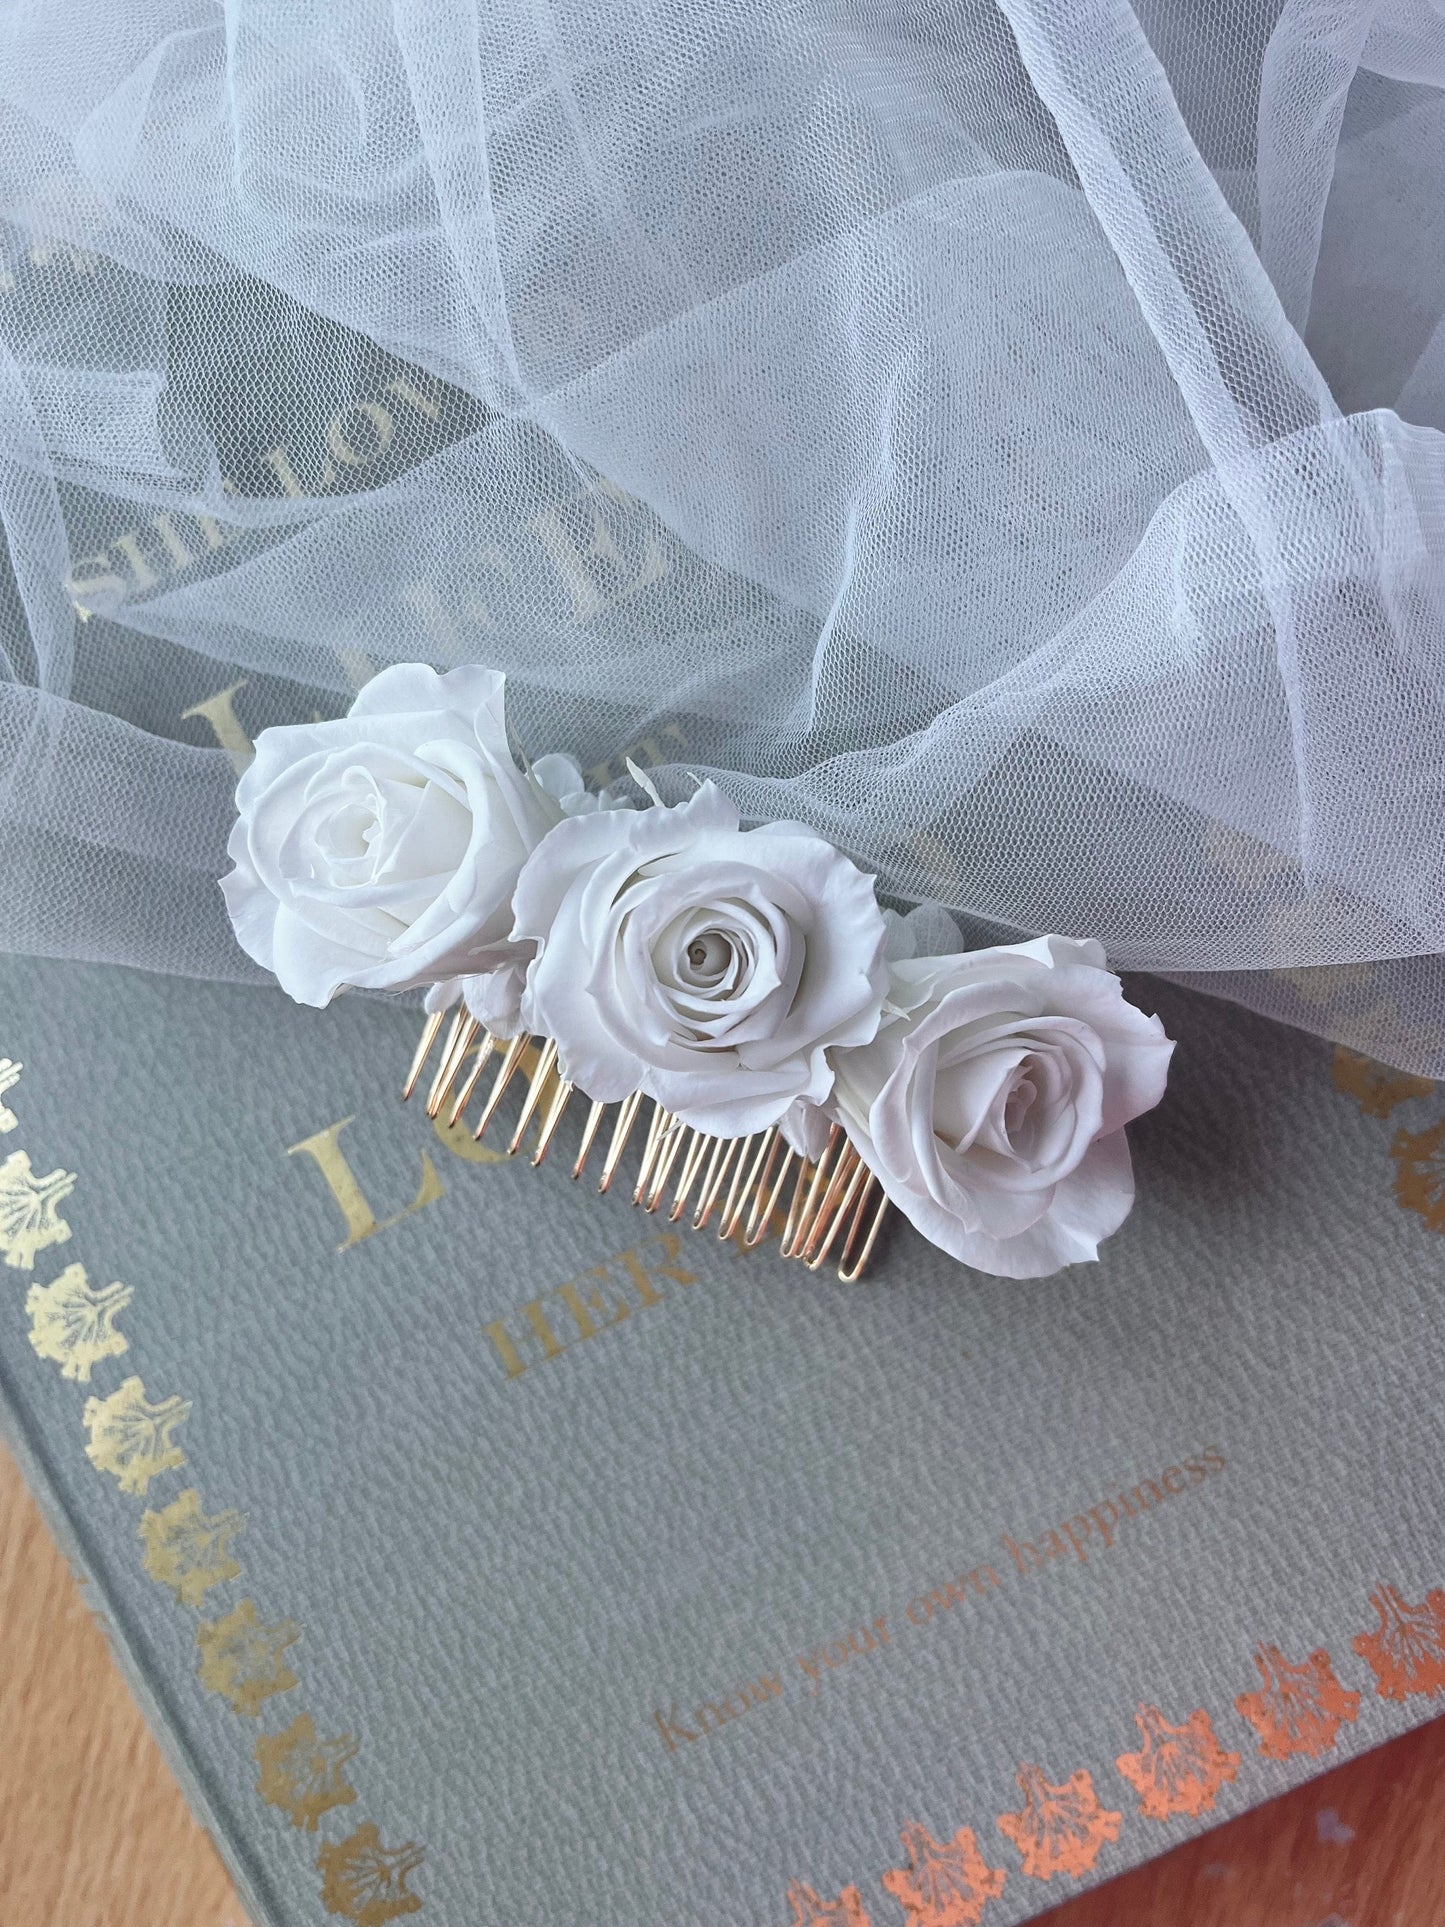 Boho Bridal White Rose Hair Comb, Real Flower Wedding Accessories, Classic Minimalist Floral Comb Gold Silver, Romantic Bride Updo HairPiece